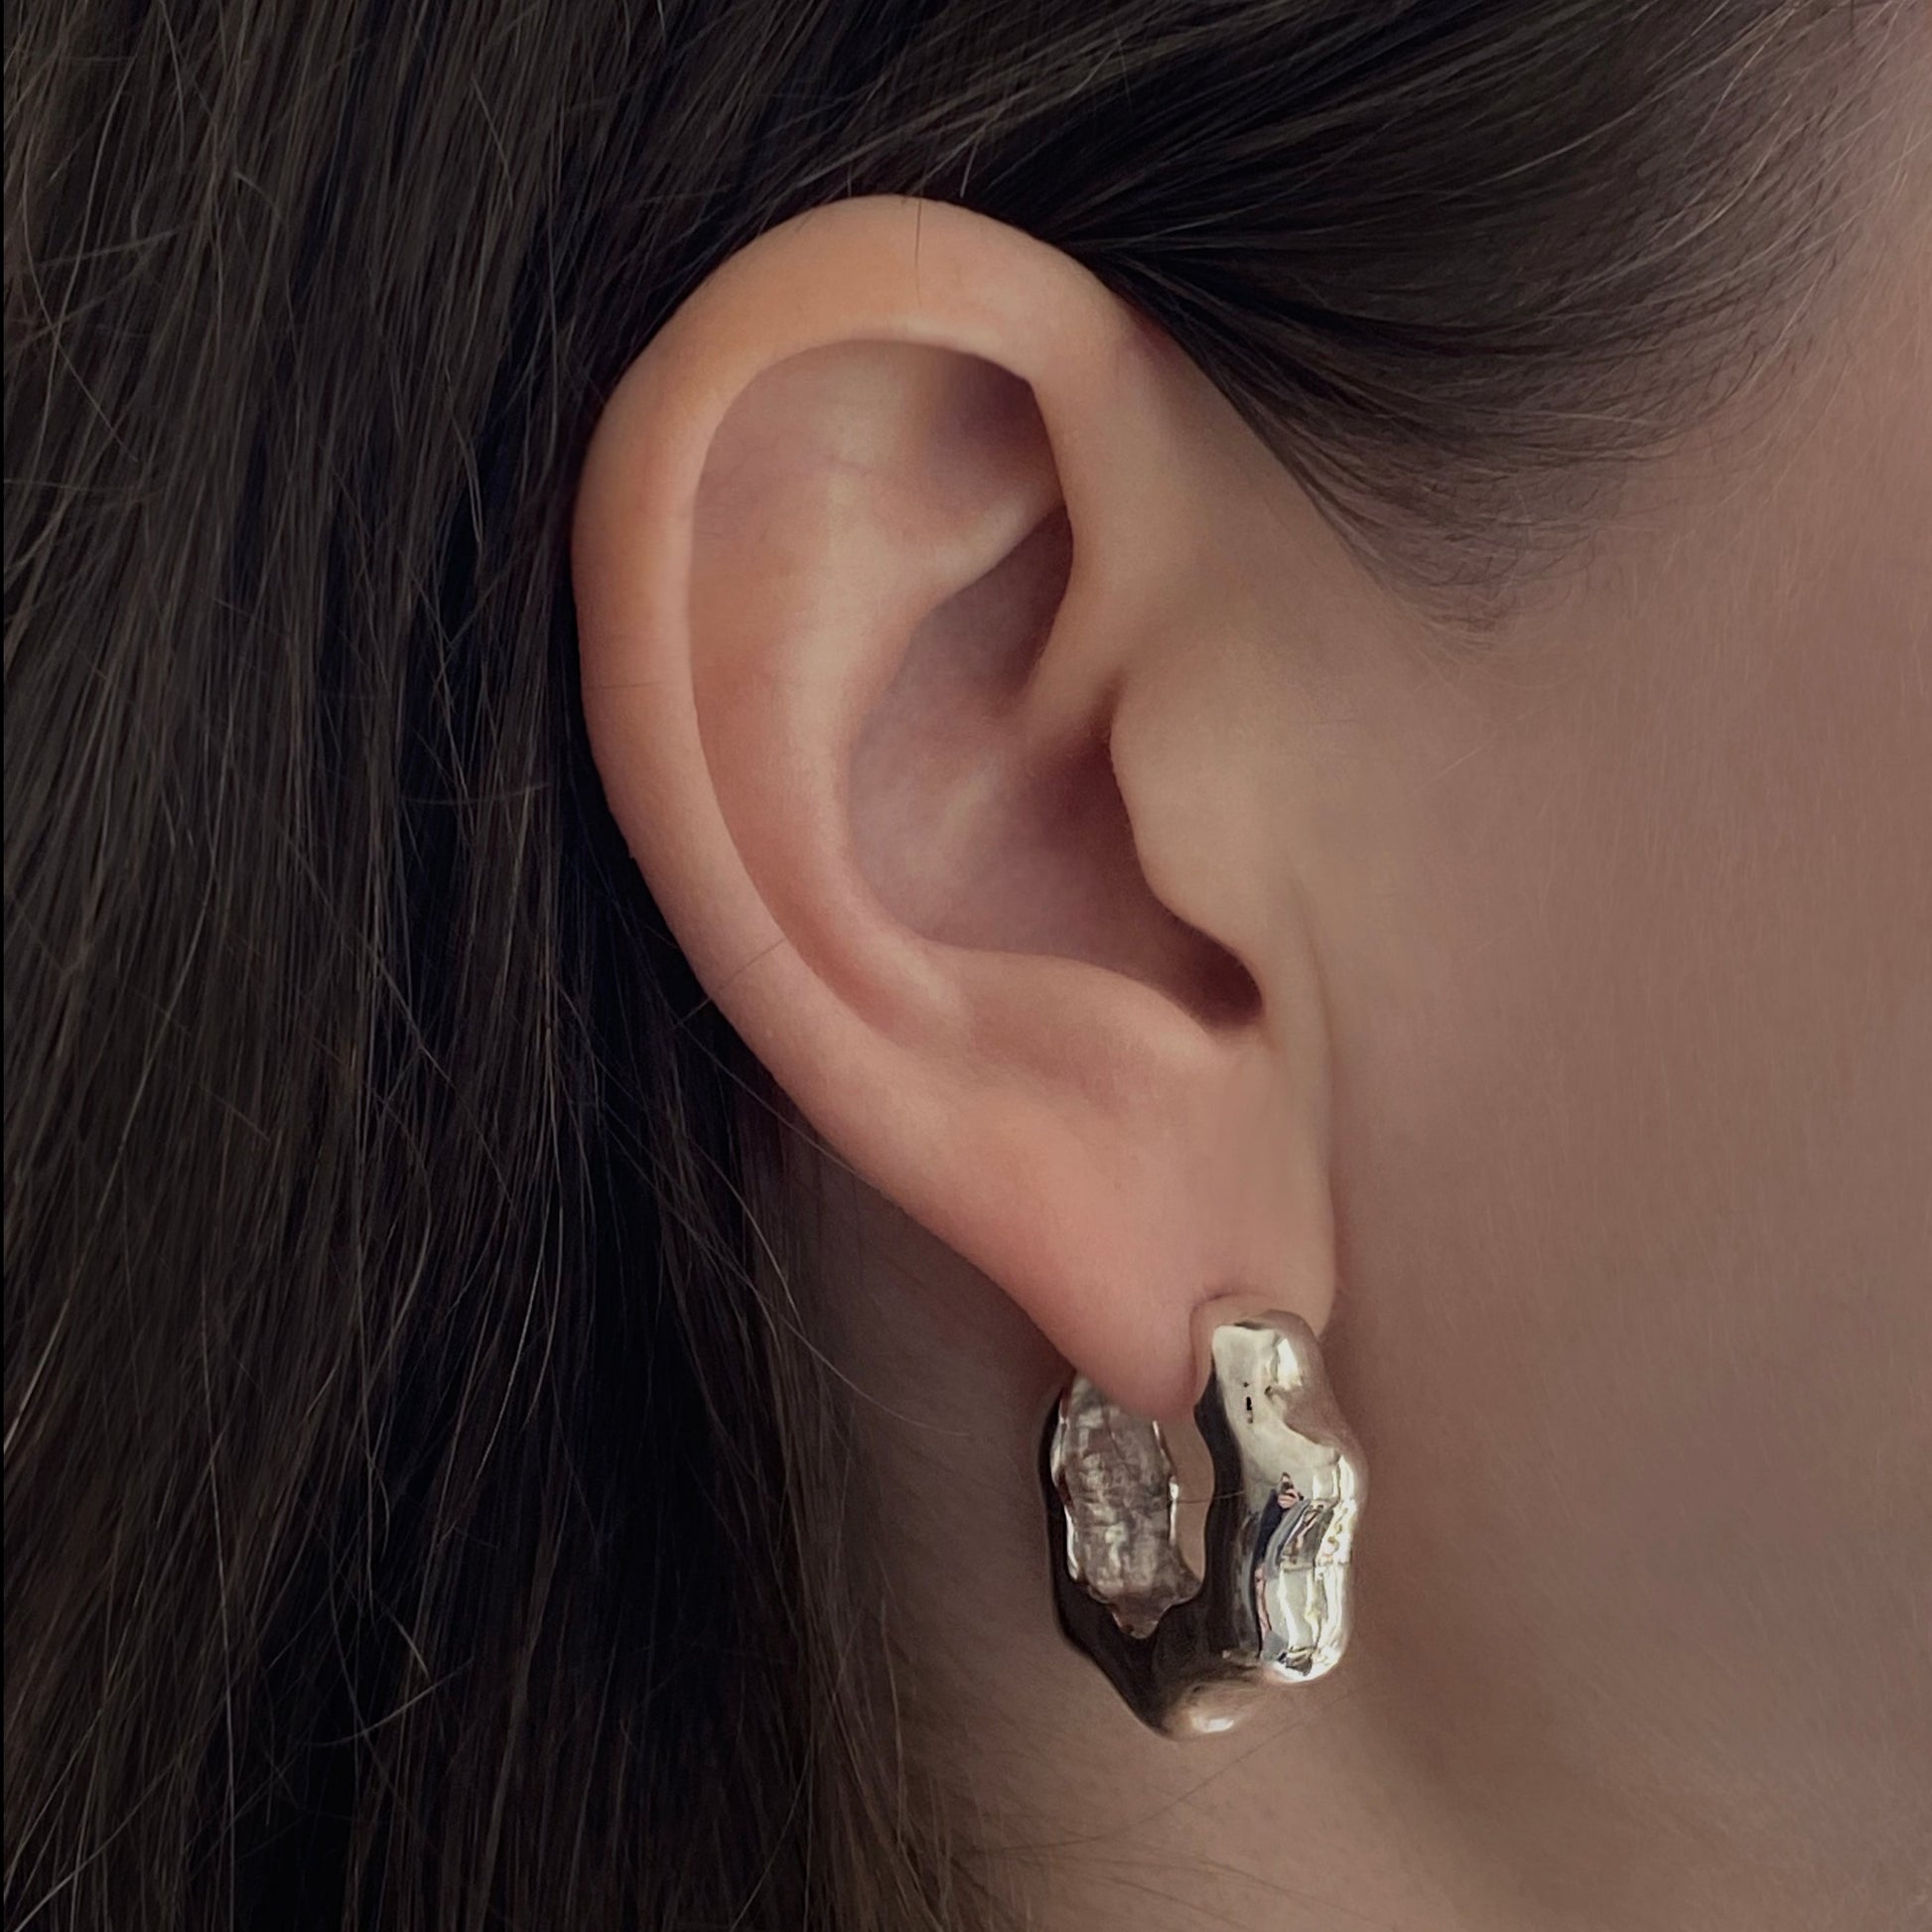 Ear with silver hoops